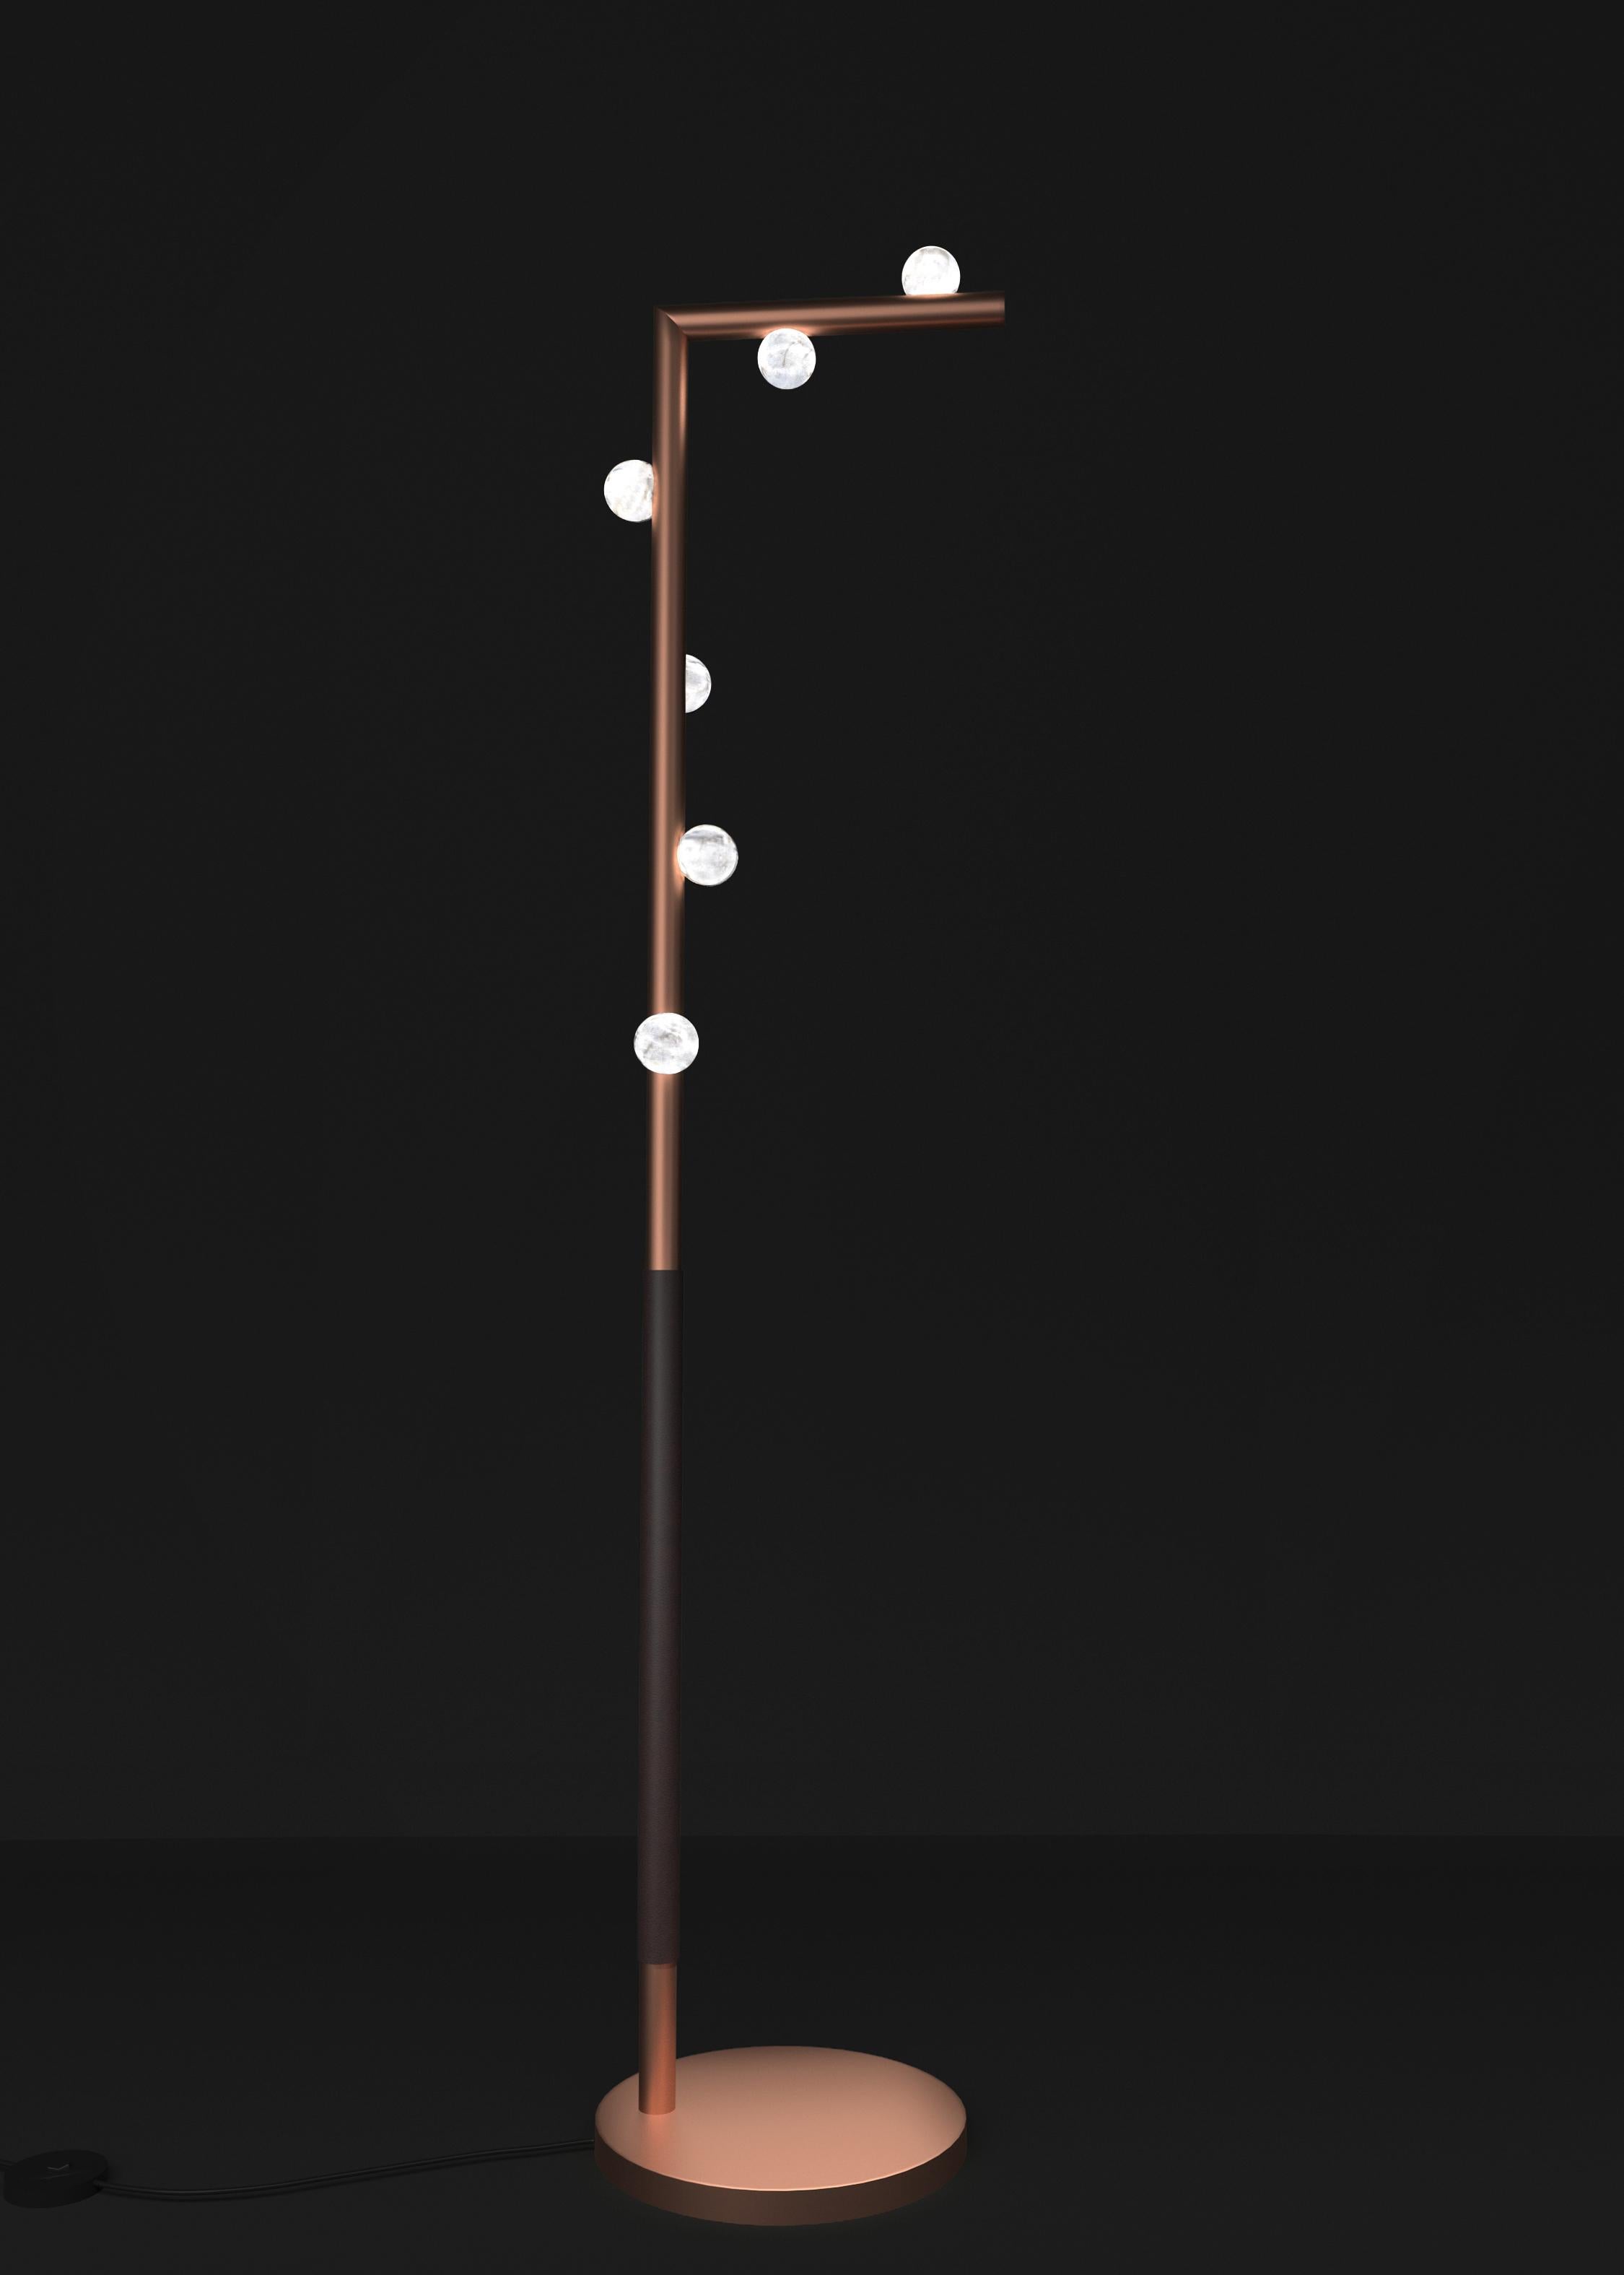 Demetra Copper Floor Lamp by Alabastro Italiano
Dimensions: D 30 x W 37 x H 158 cm.
Materials: White alabaster, copper and leather.

Available in different finishes: Shiny Silver, Bronze, Brushed Brass, Ruggine of Florence, Brushed Burnished, Shiny